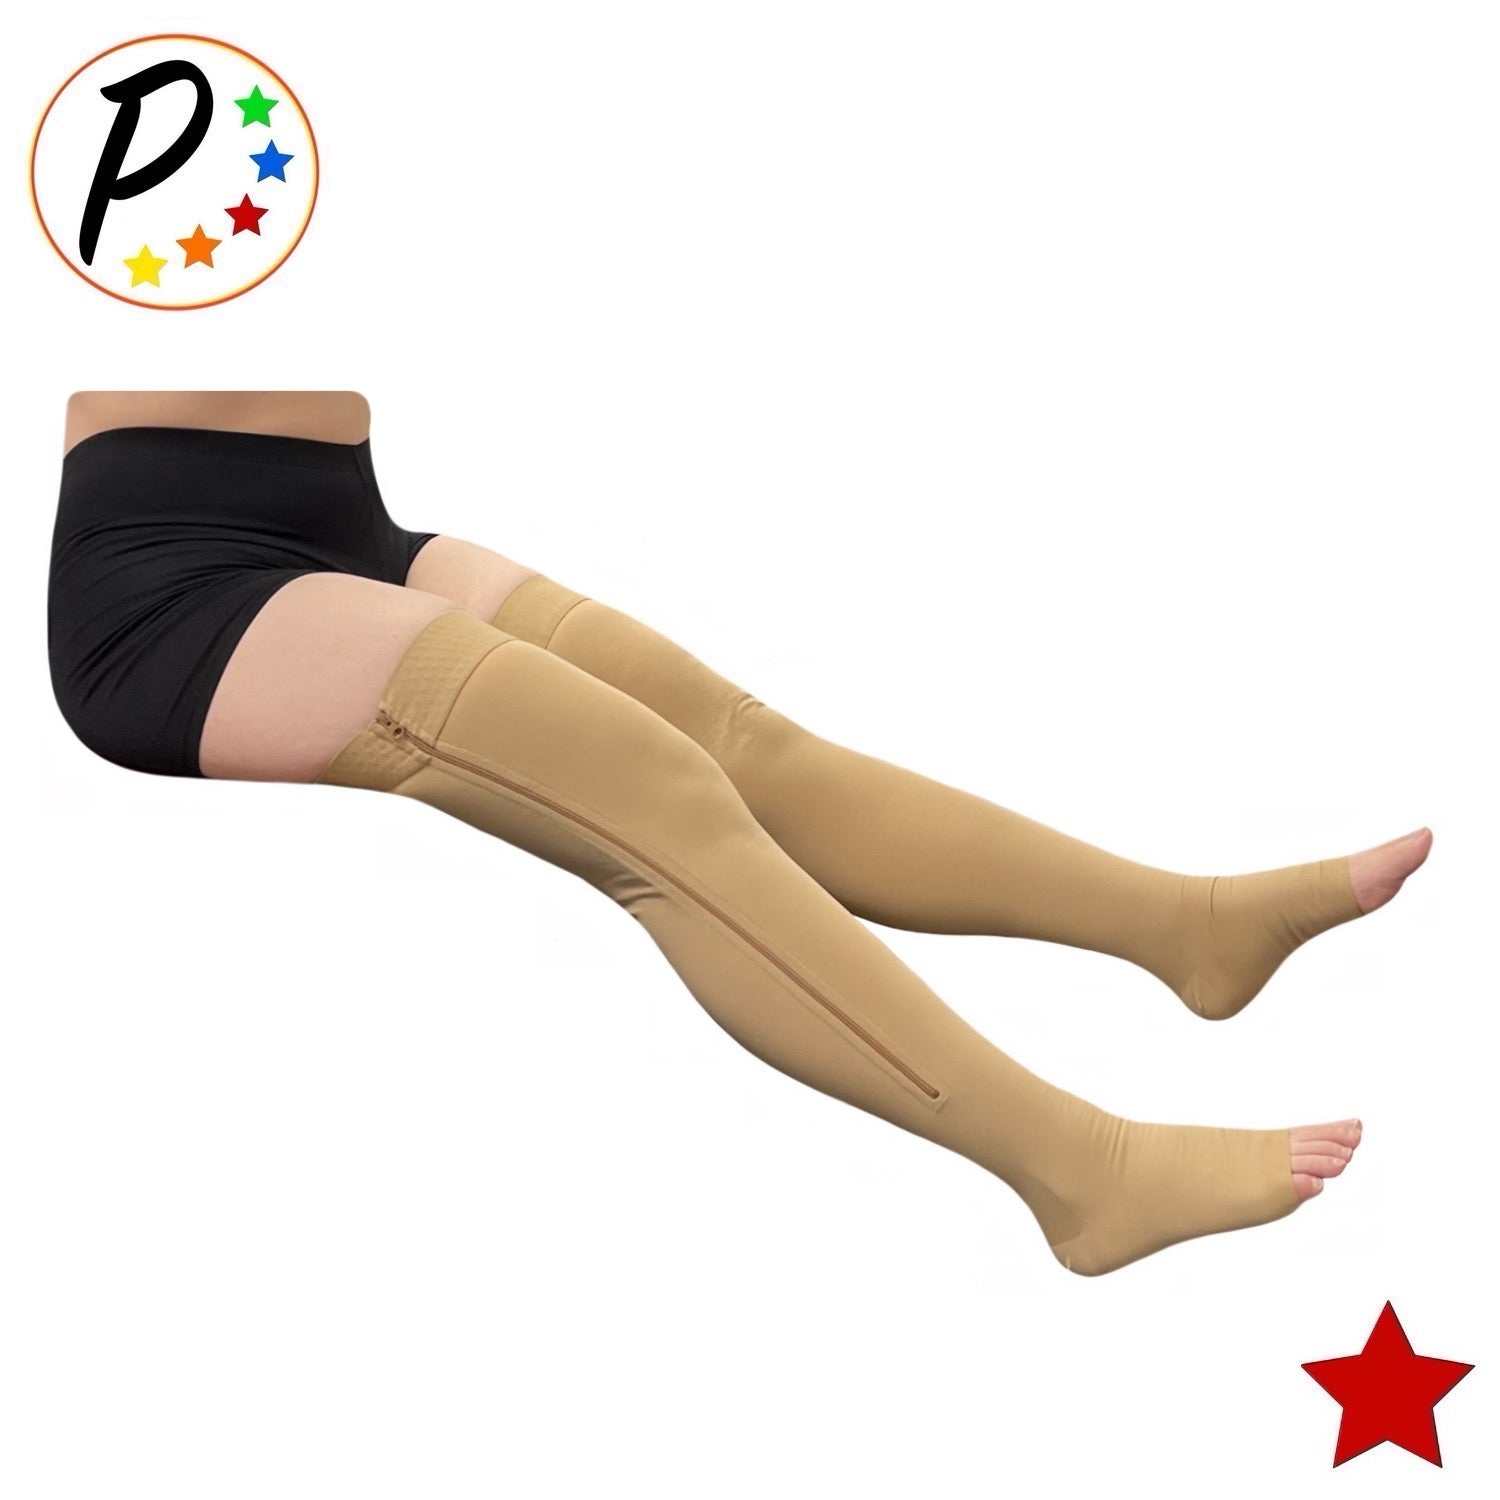 Dr. San Thigh High Compression Stockings, Open Toe, Pair, Firm